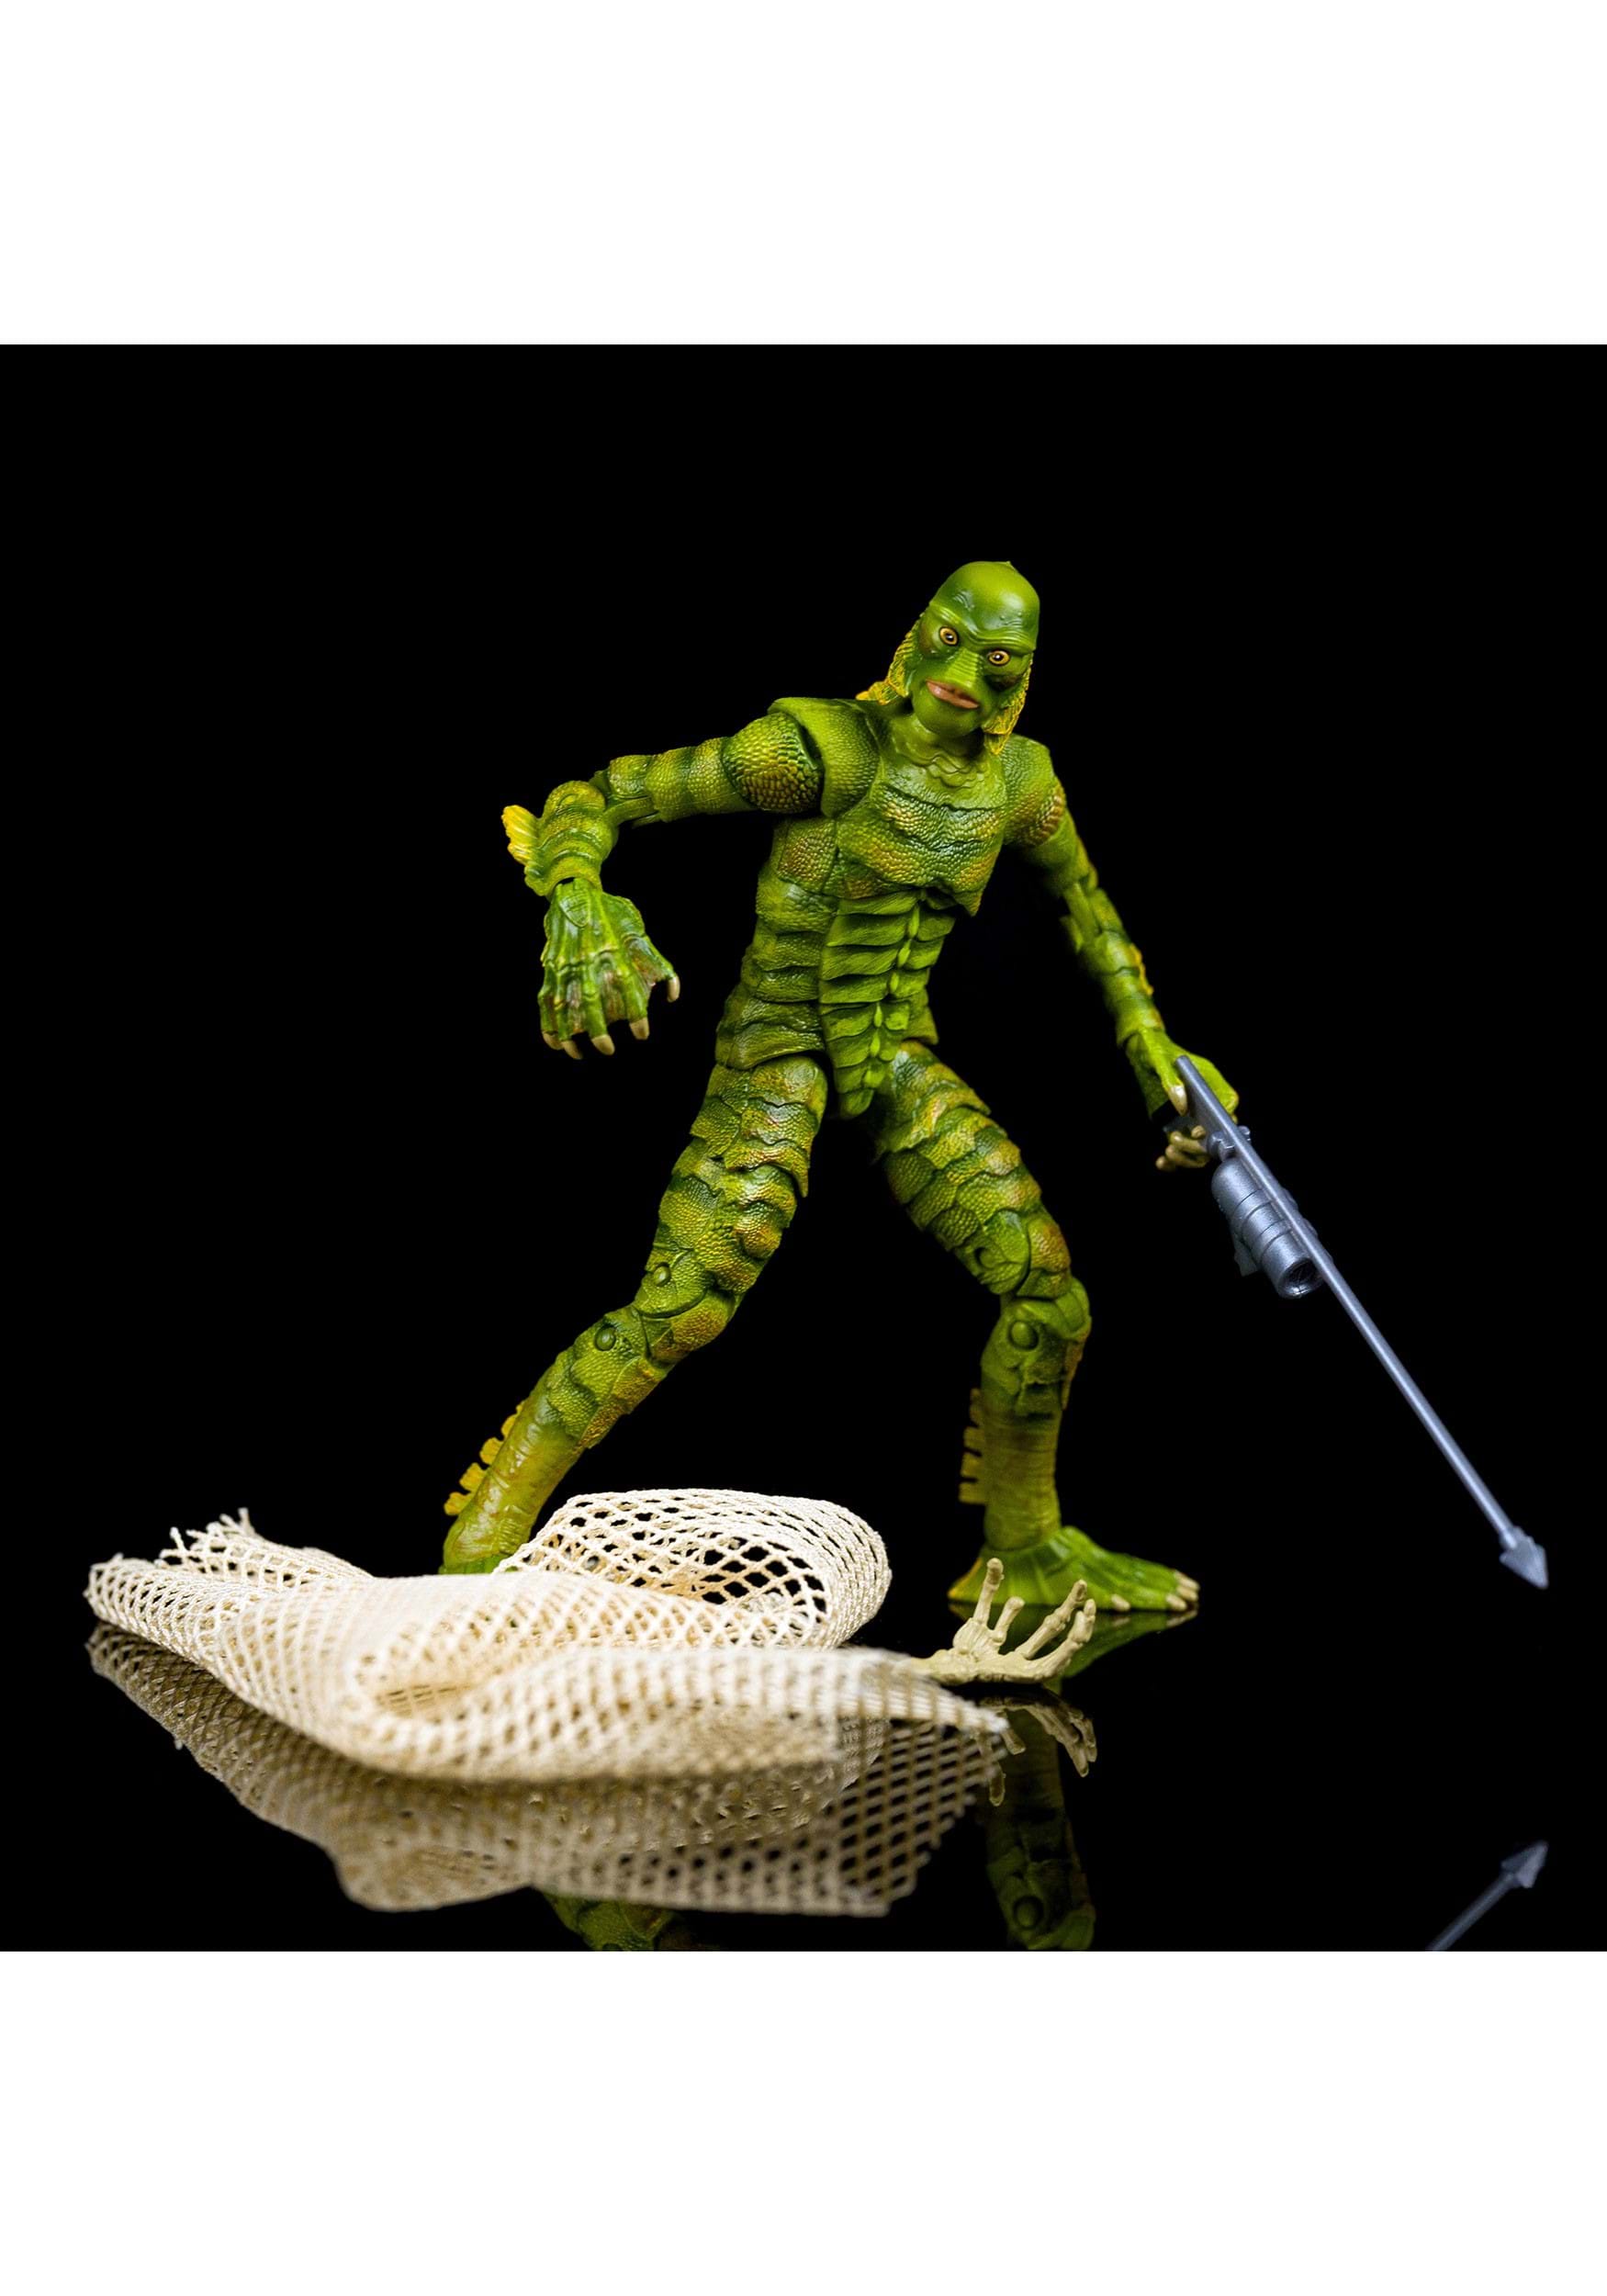 6.75 Inch Universal Monsters The Creature from the Black Lagoon Figure